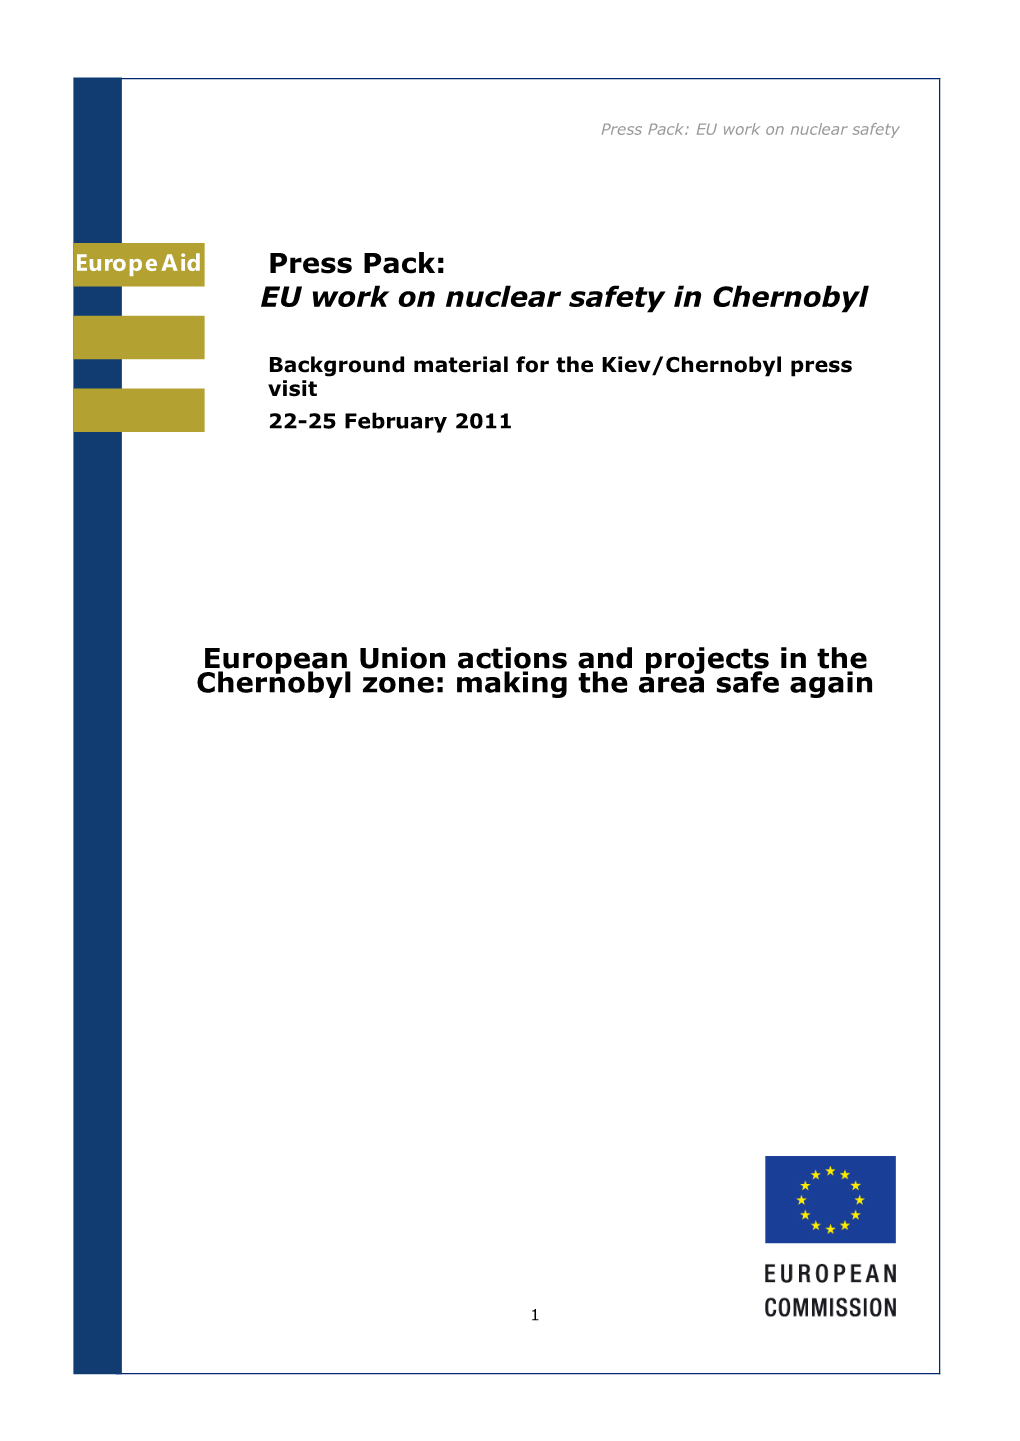 Press Pack: EU Work on Nuclear Safety in Chernobyl European Union